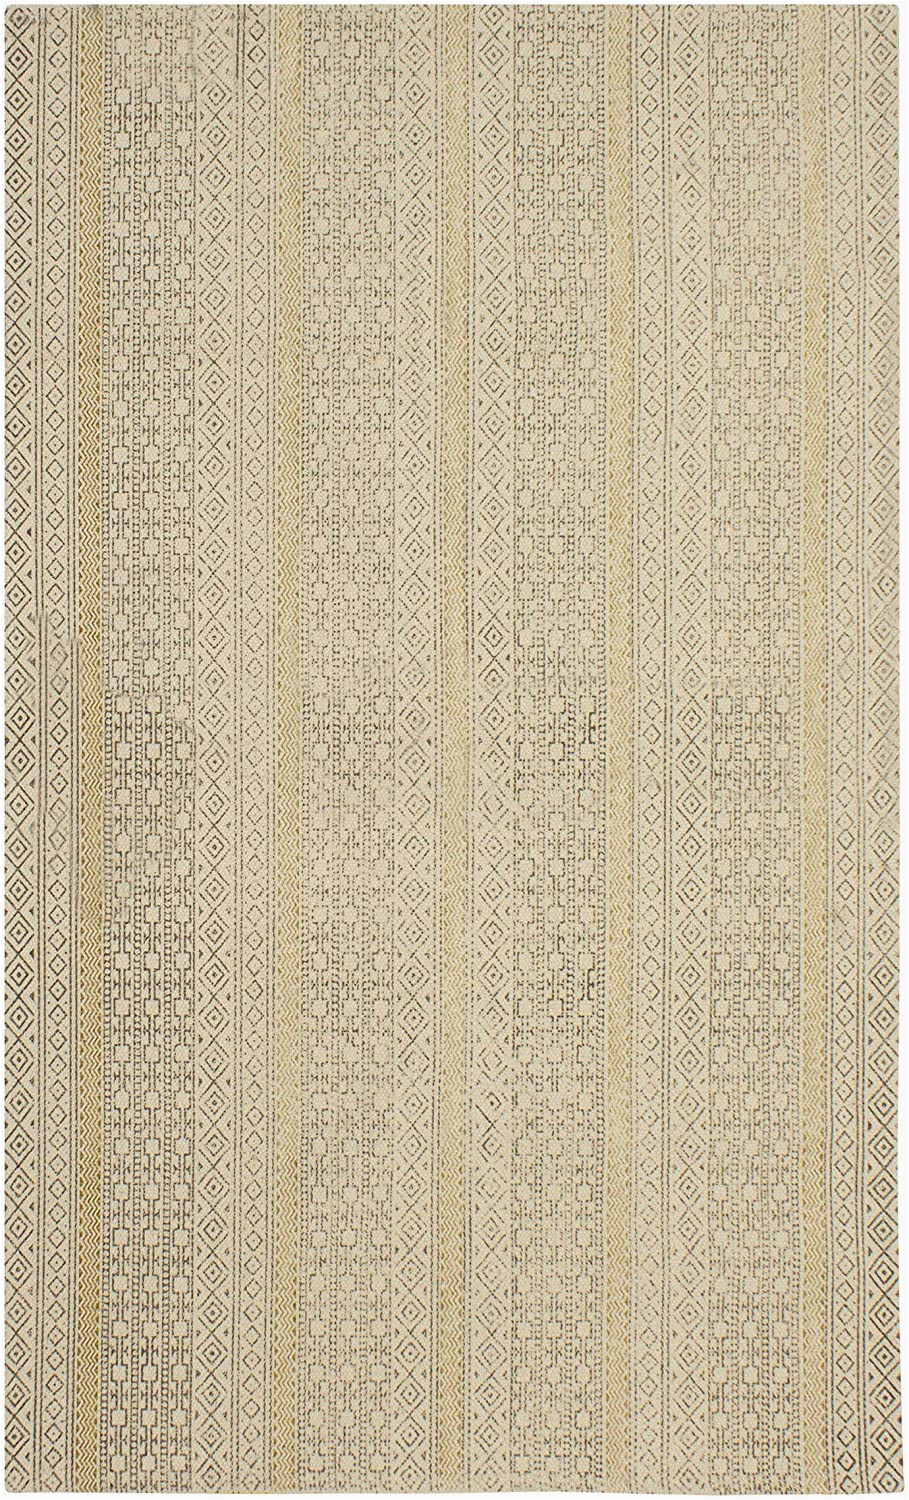 French Connection Home Bath Rug Amazon Com French Connection Cotton Accent Rug 27 In X 45